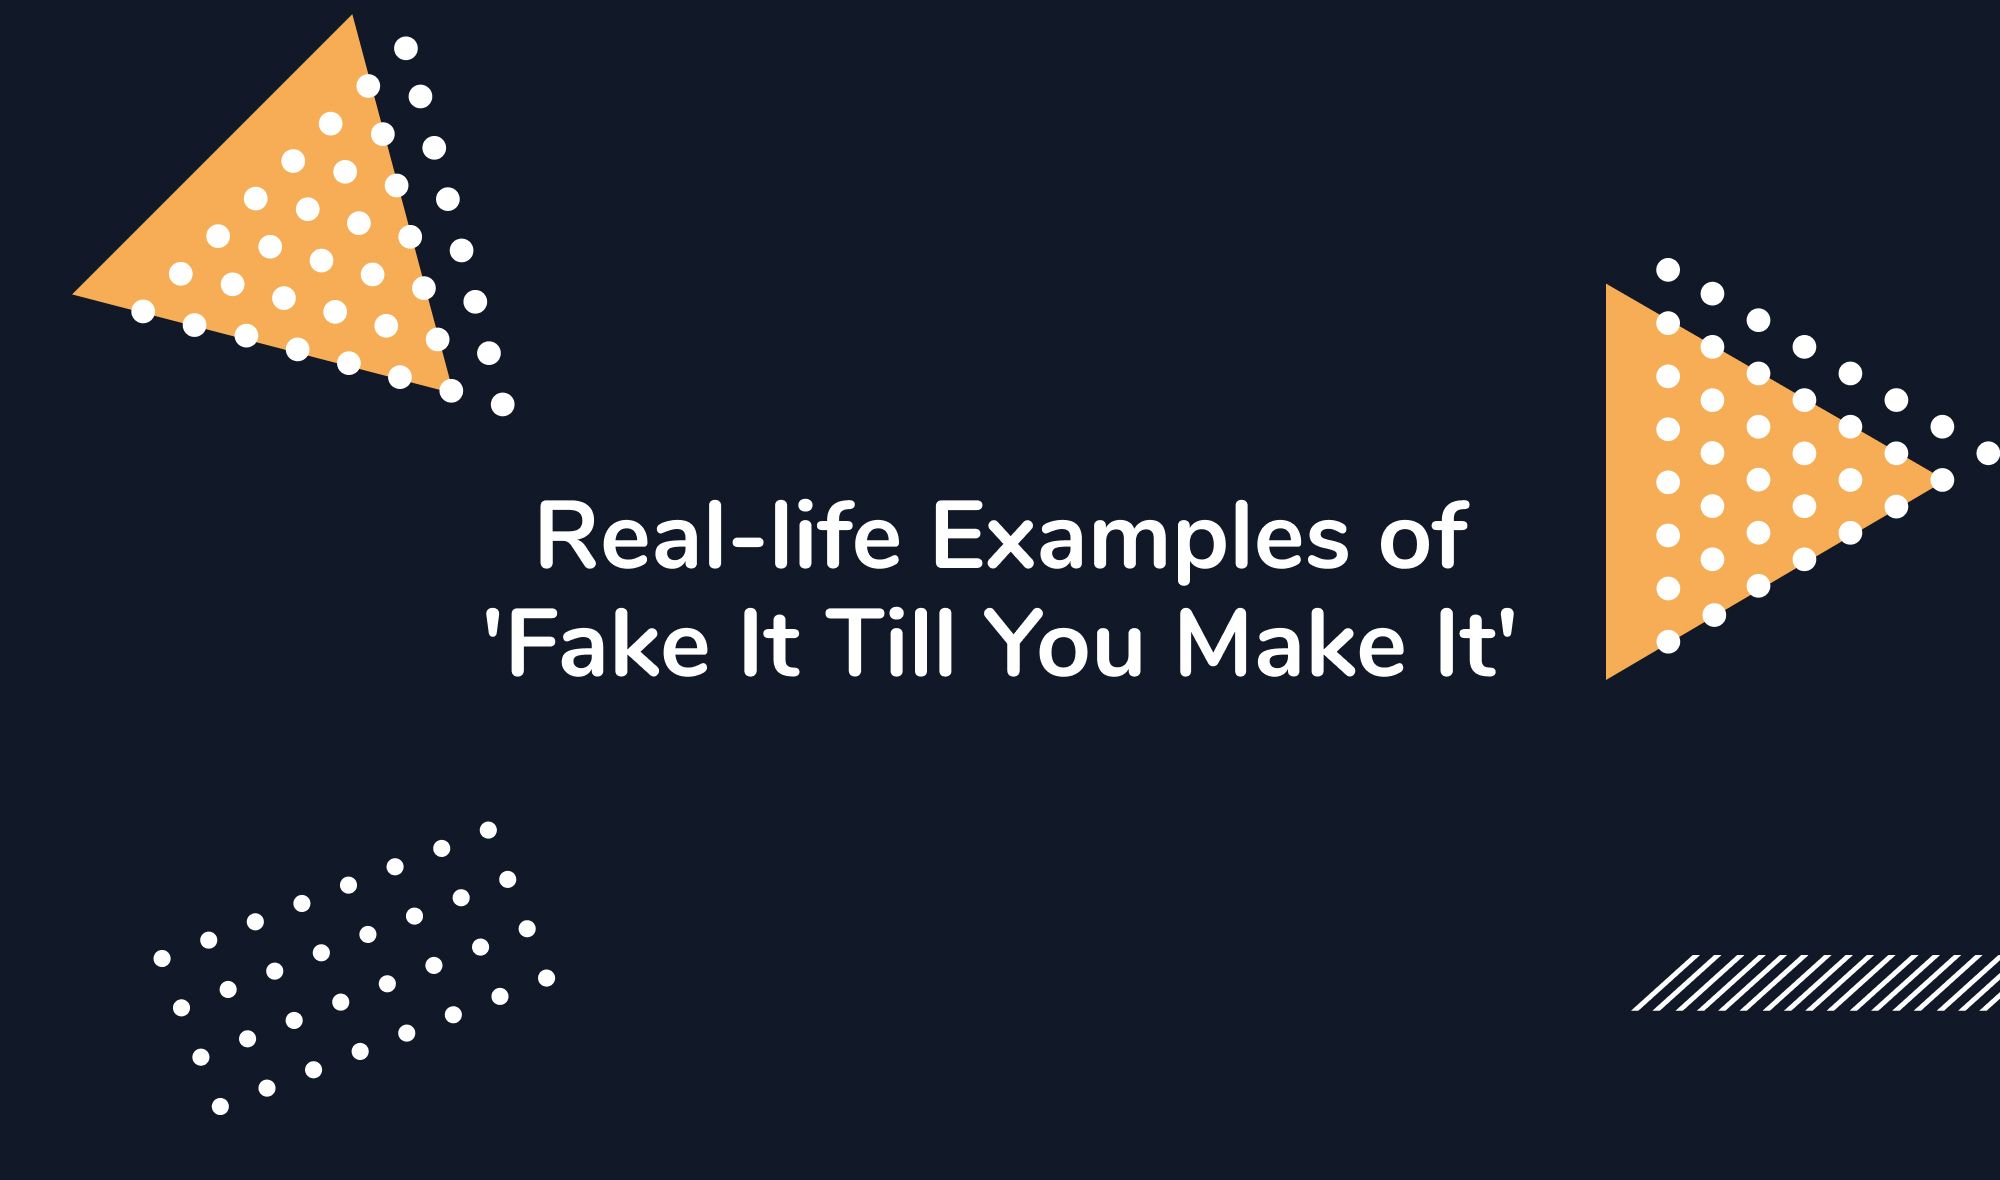 Real-life Examples of 'Fake It Till You Make It'